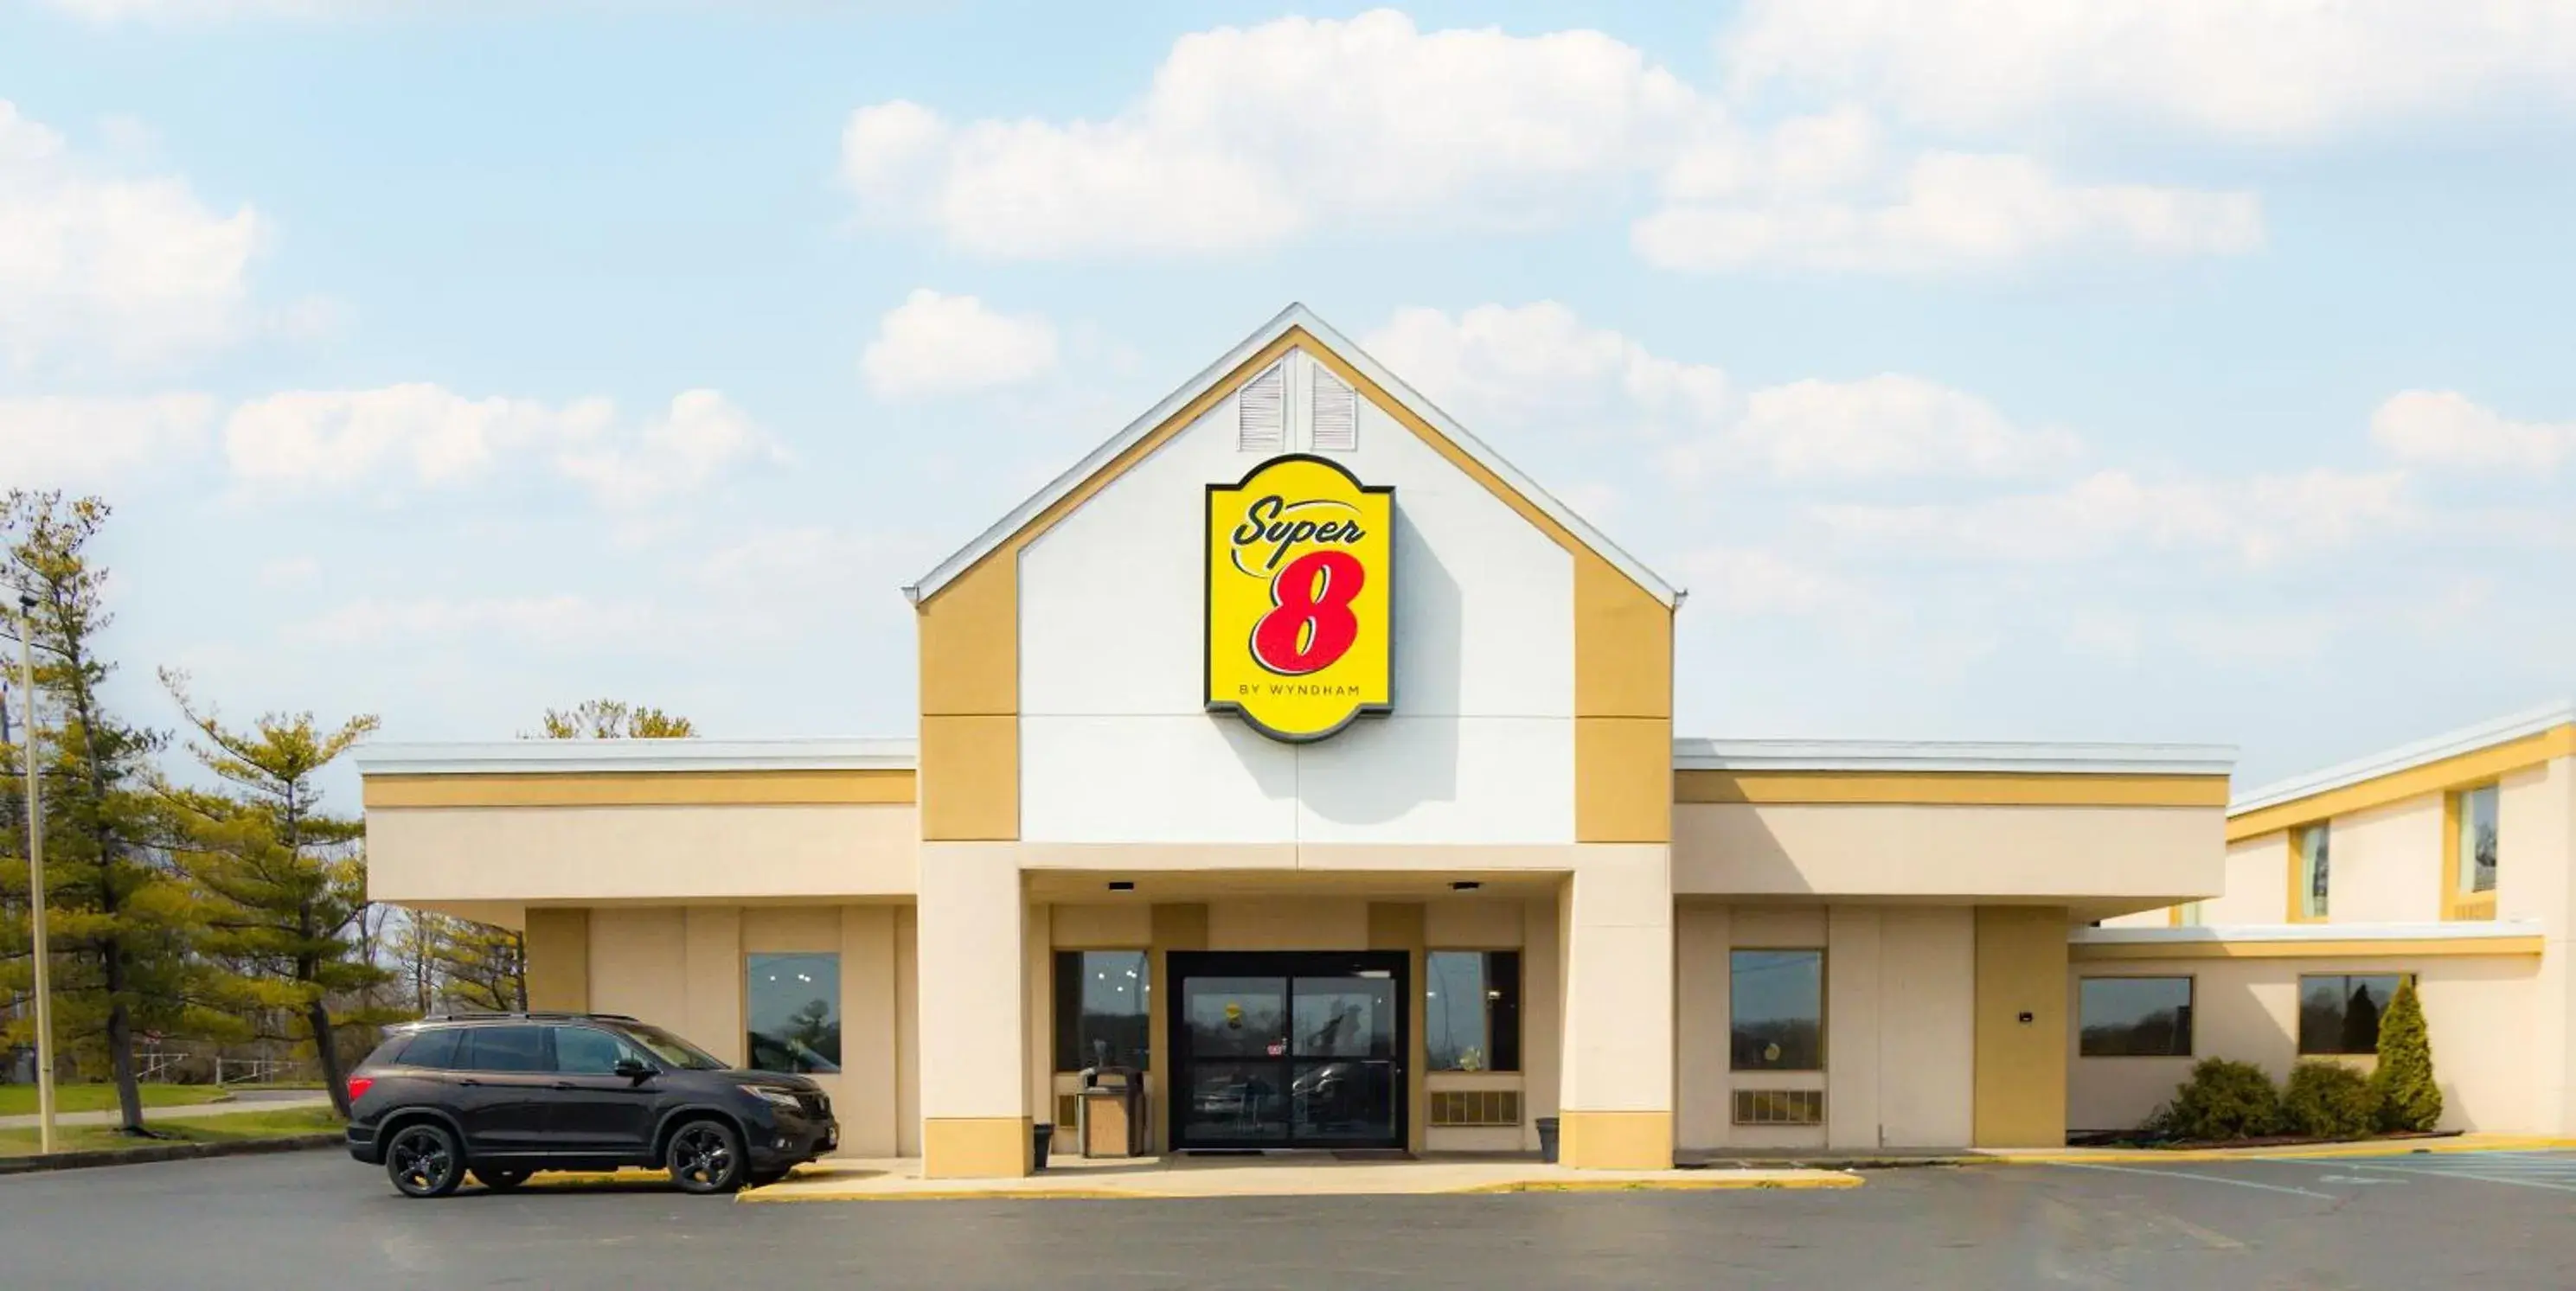 Property Building in Super 8 by Wyndham Indianapolis South